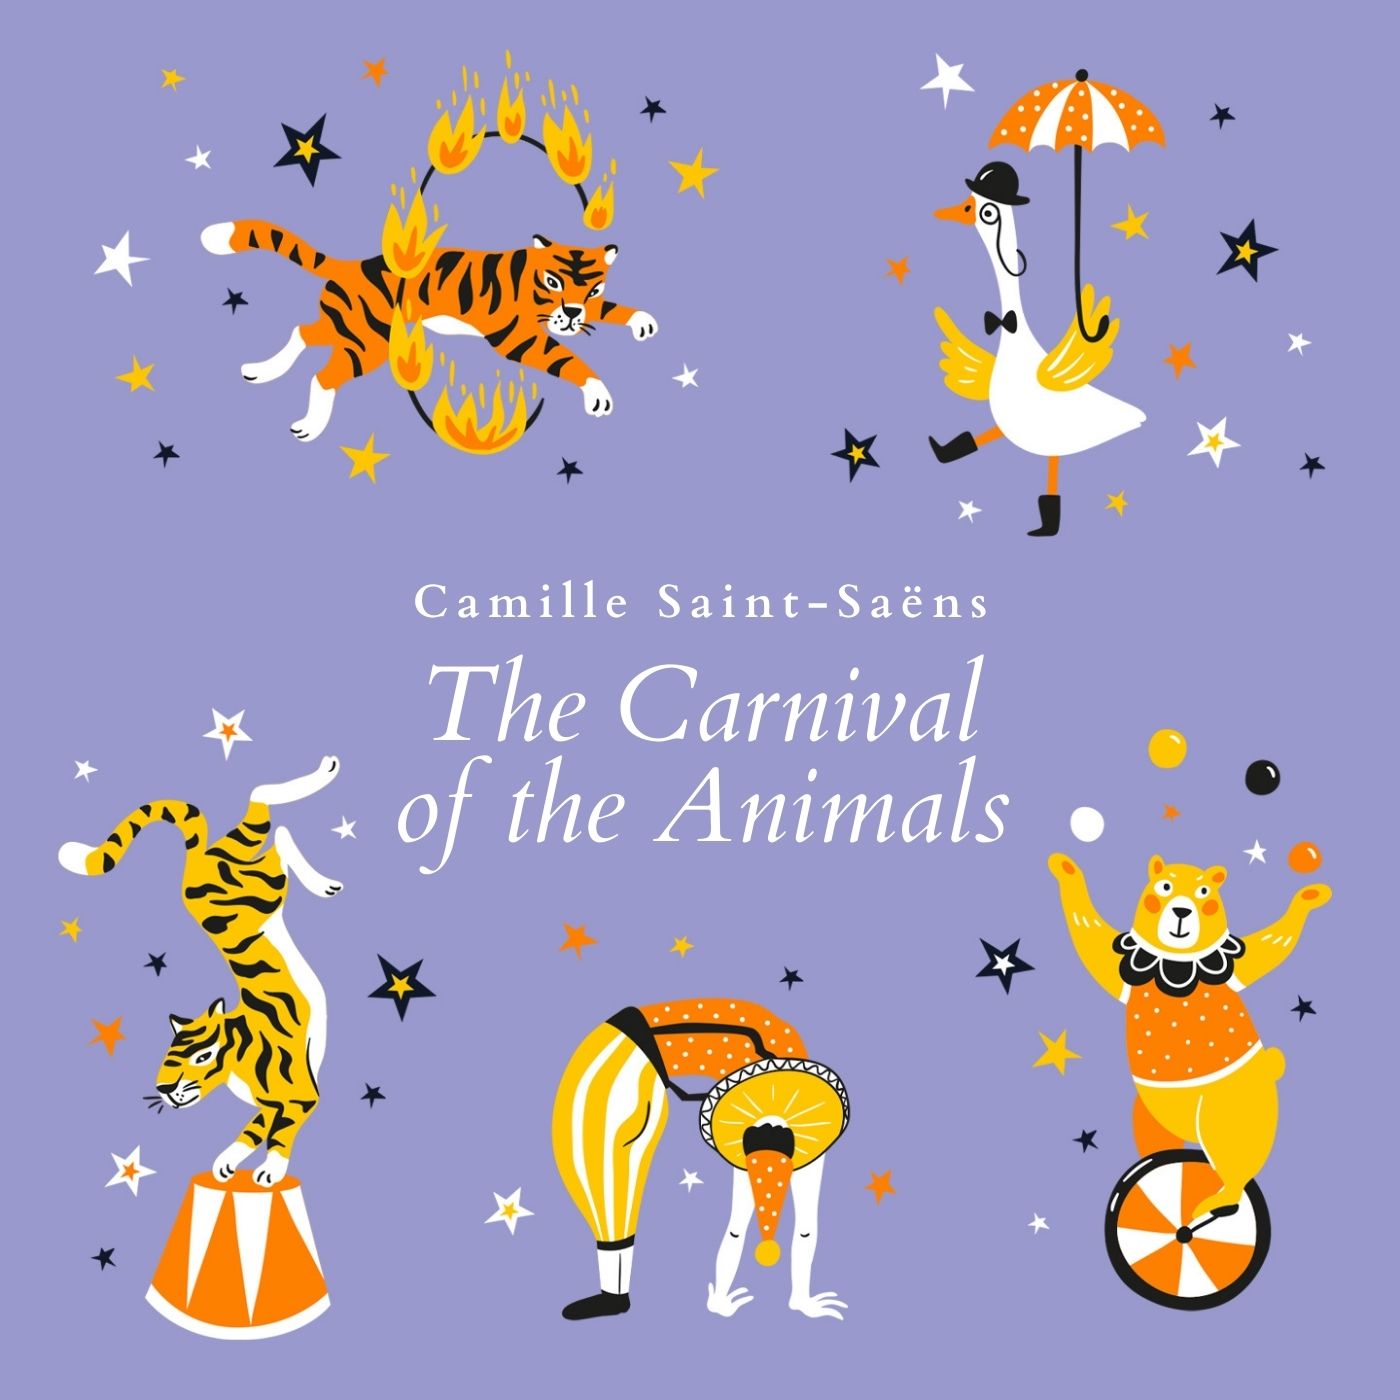 ♬ Camille Saint-Saëns ♯ The Carnival of the Animals (complete) / Le Carnaval  des Animaux ♯ [HQ] 